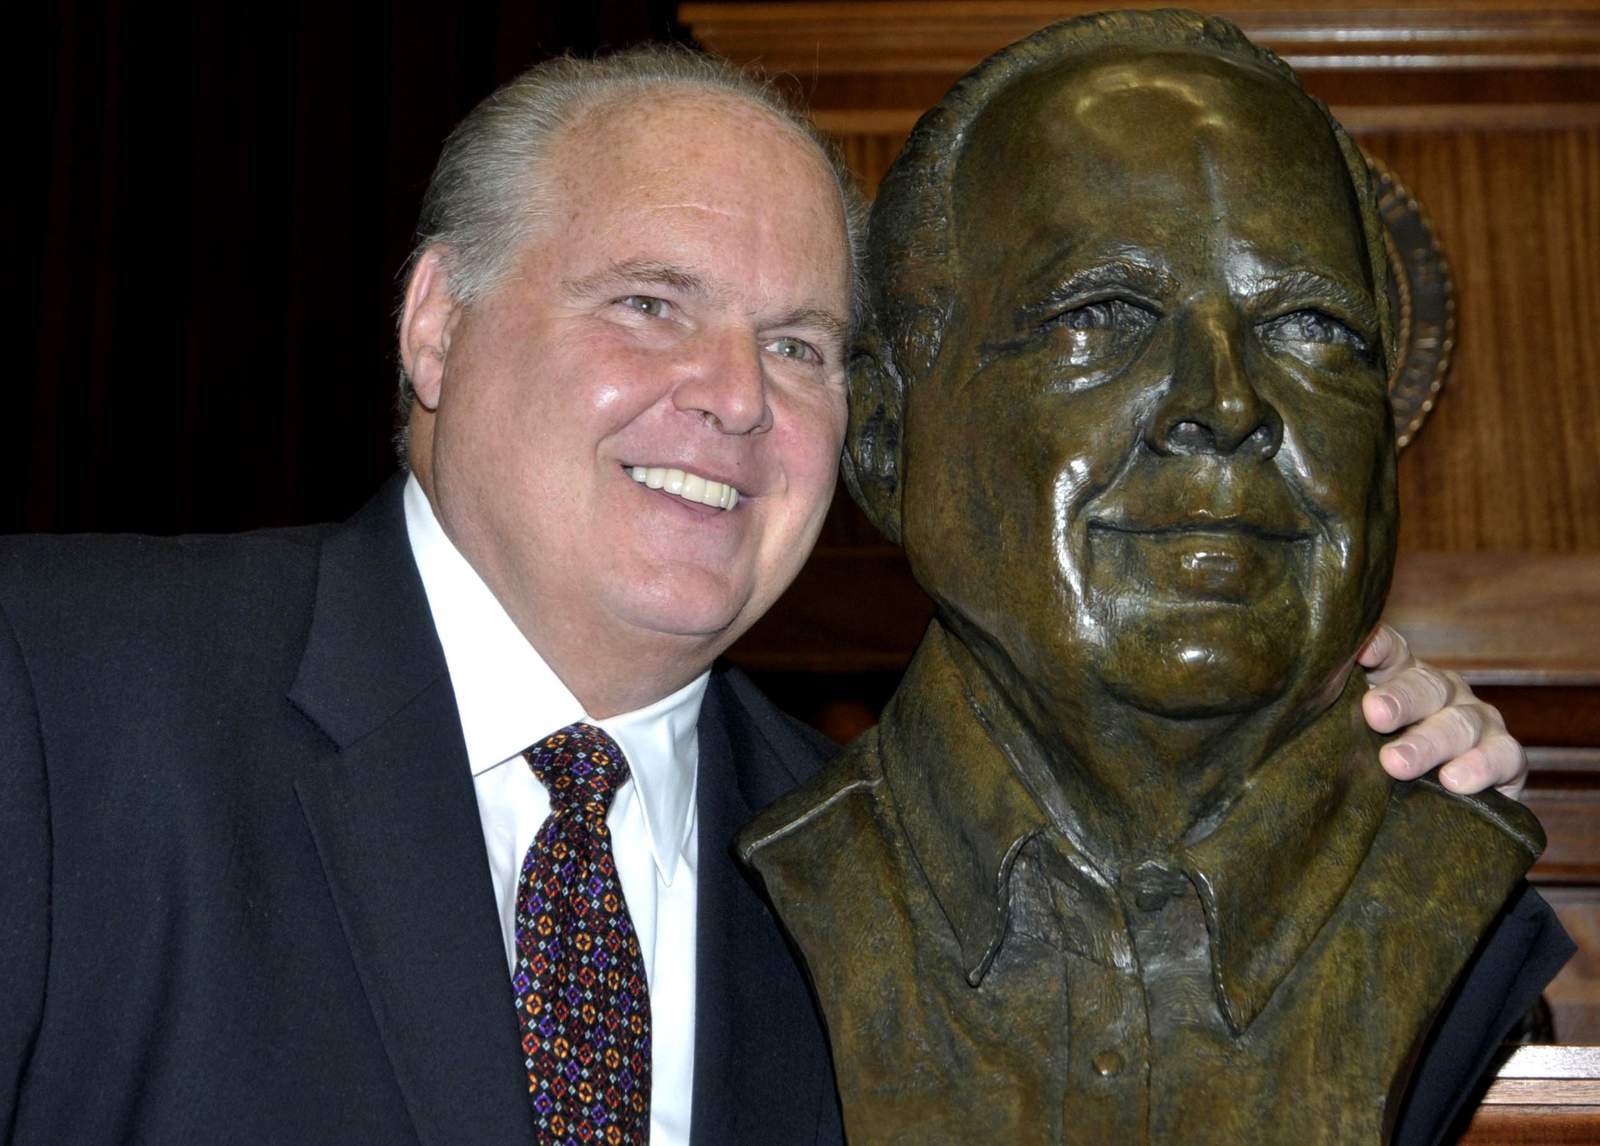 Rush Limbaugh says he's been diagnosed with lung cancer